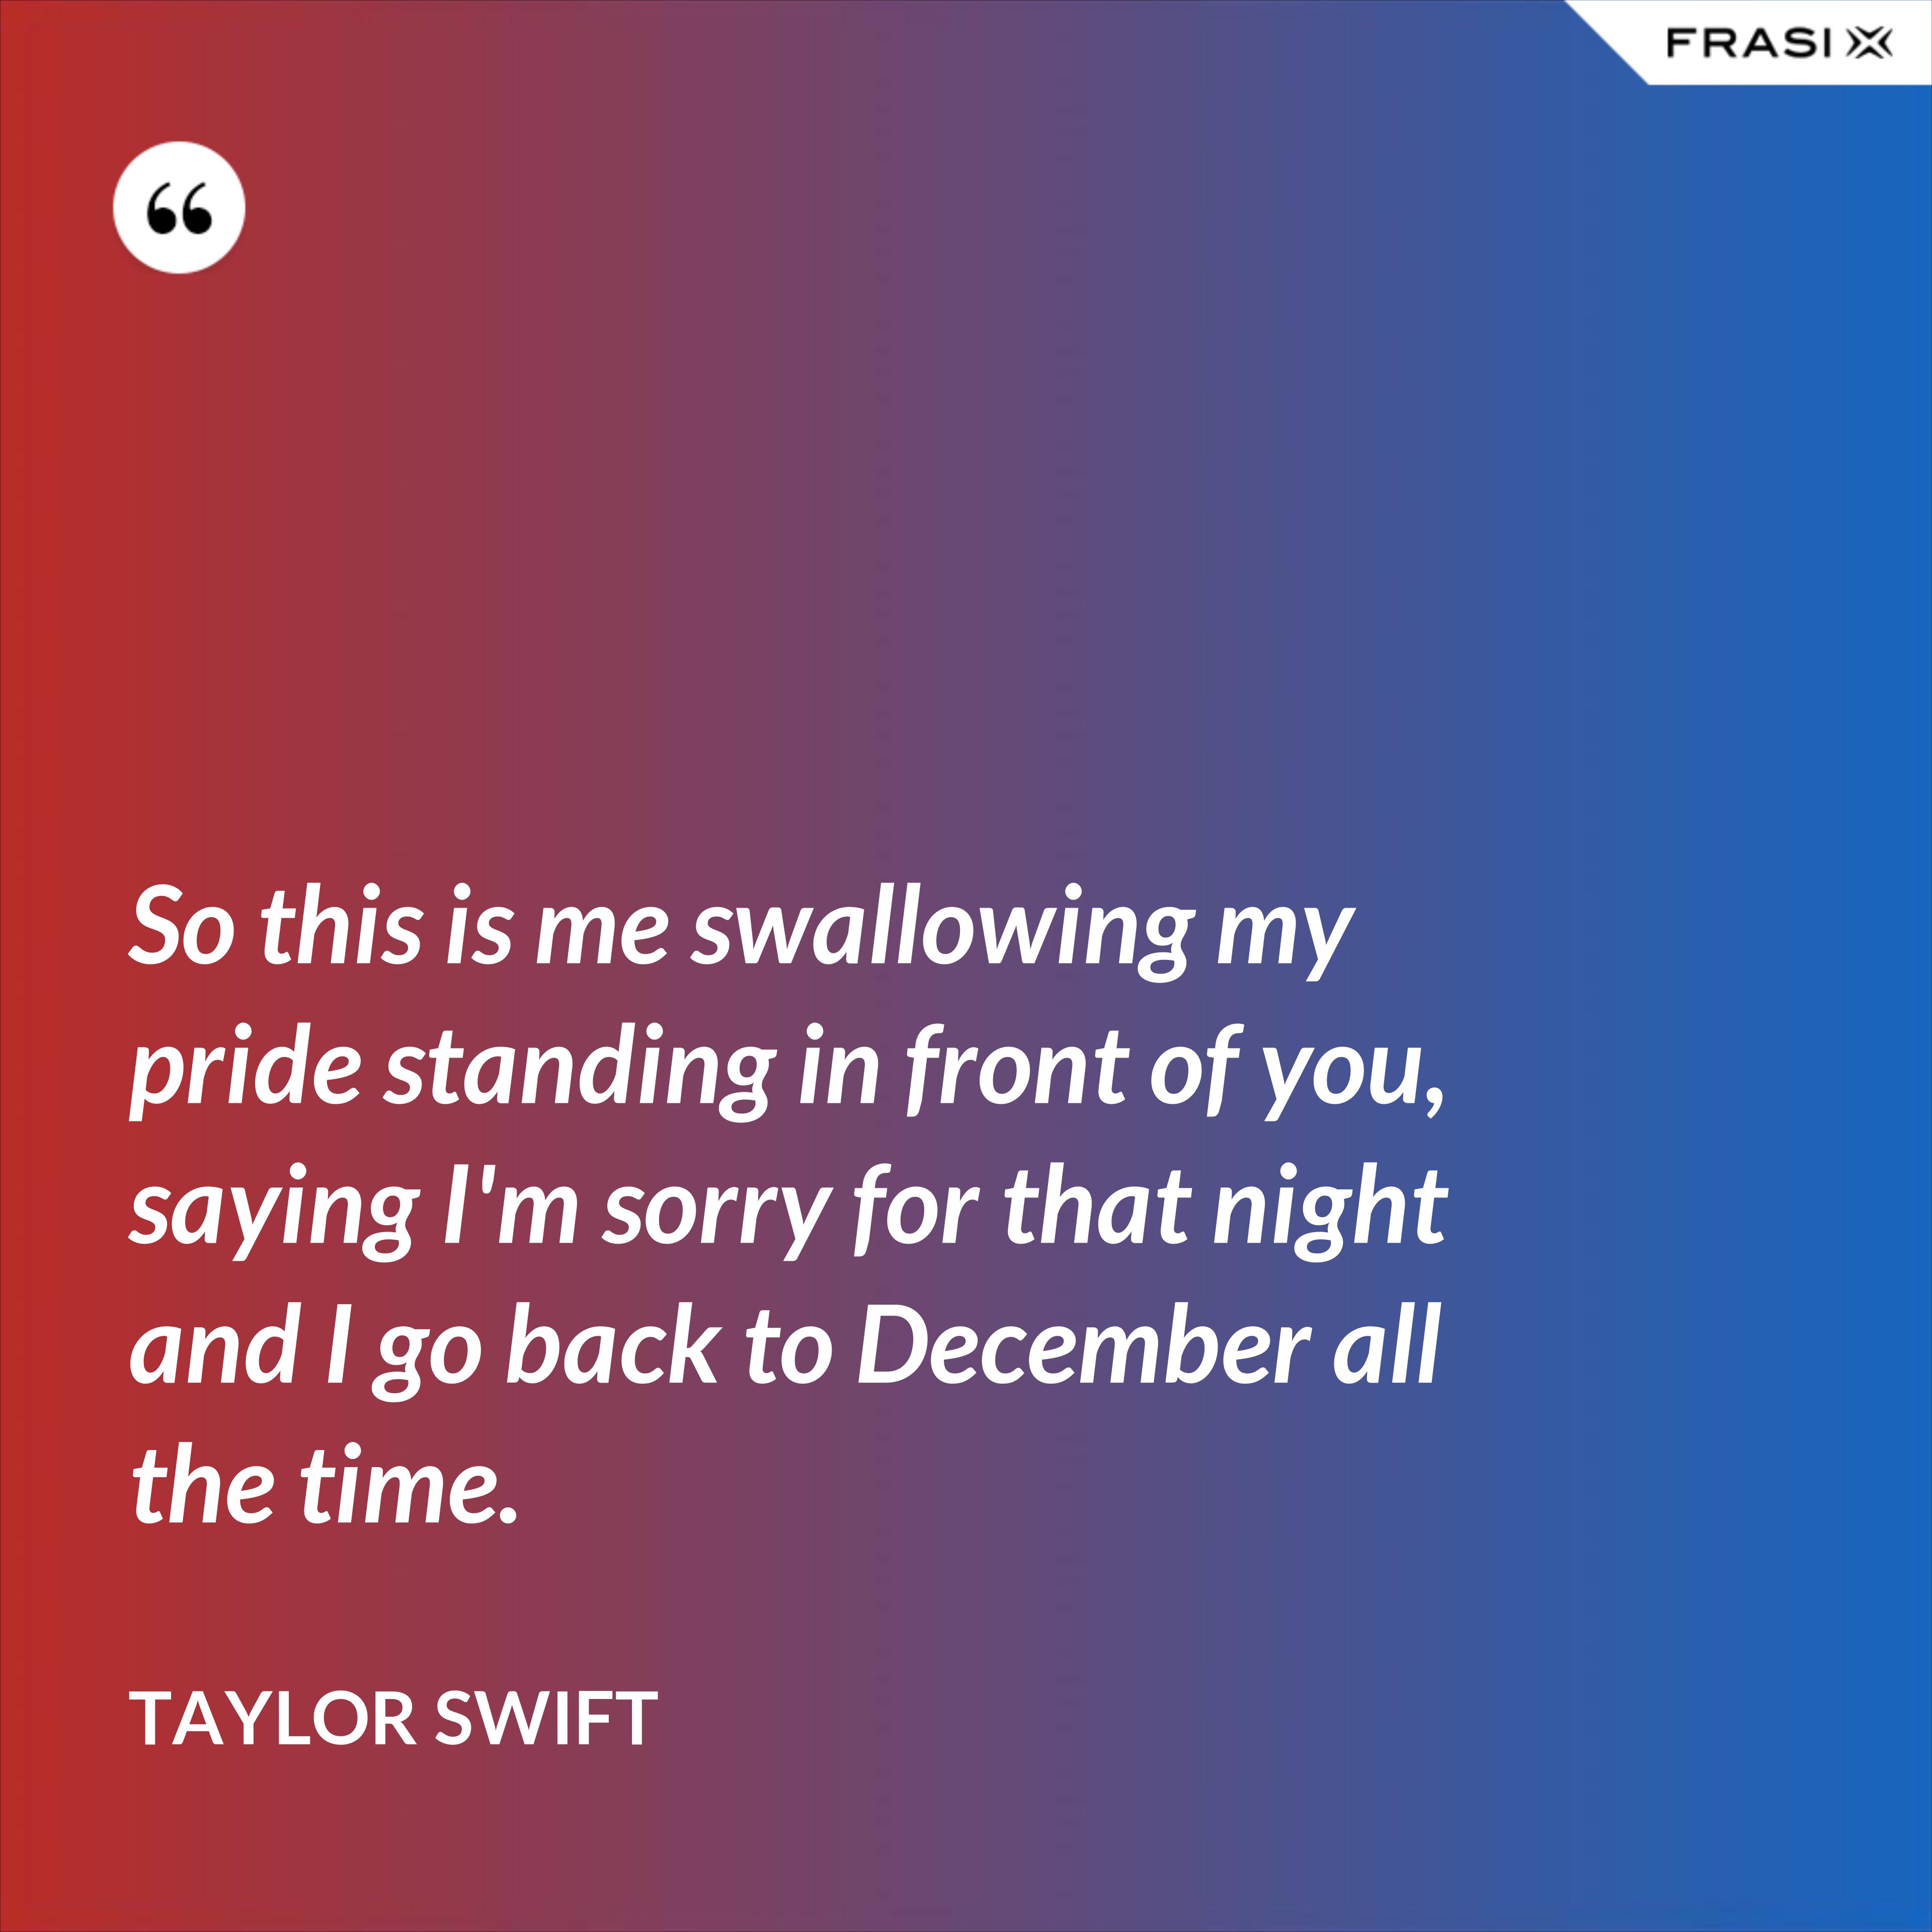 So this is me swallowing my pride standing in front of you, saying I'm sorry for that night and I go back to December all the time. - Taylor Swift